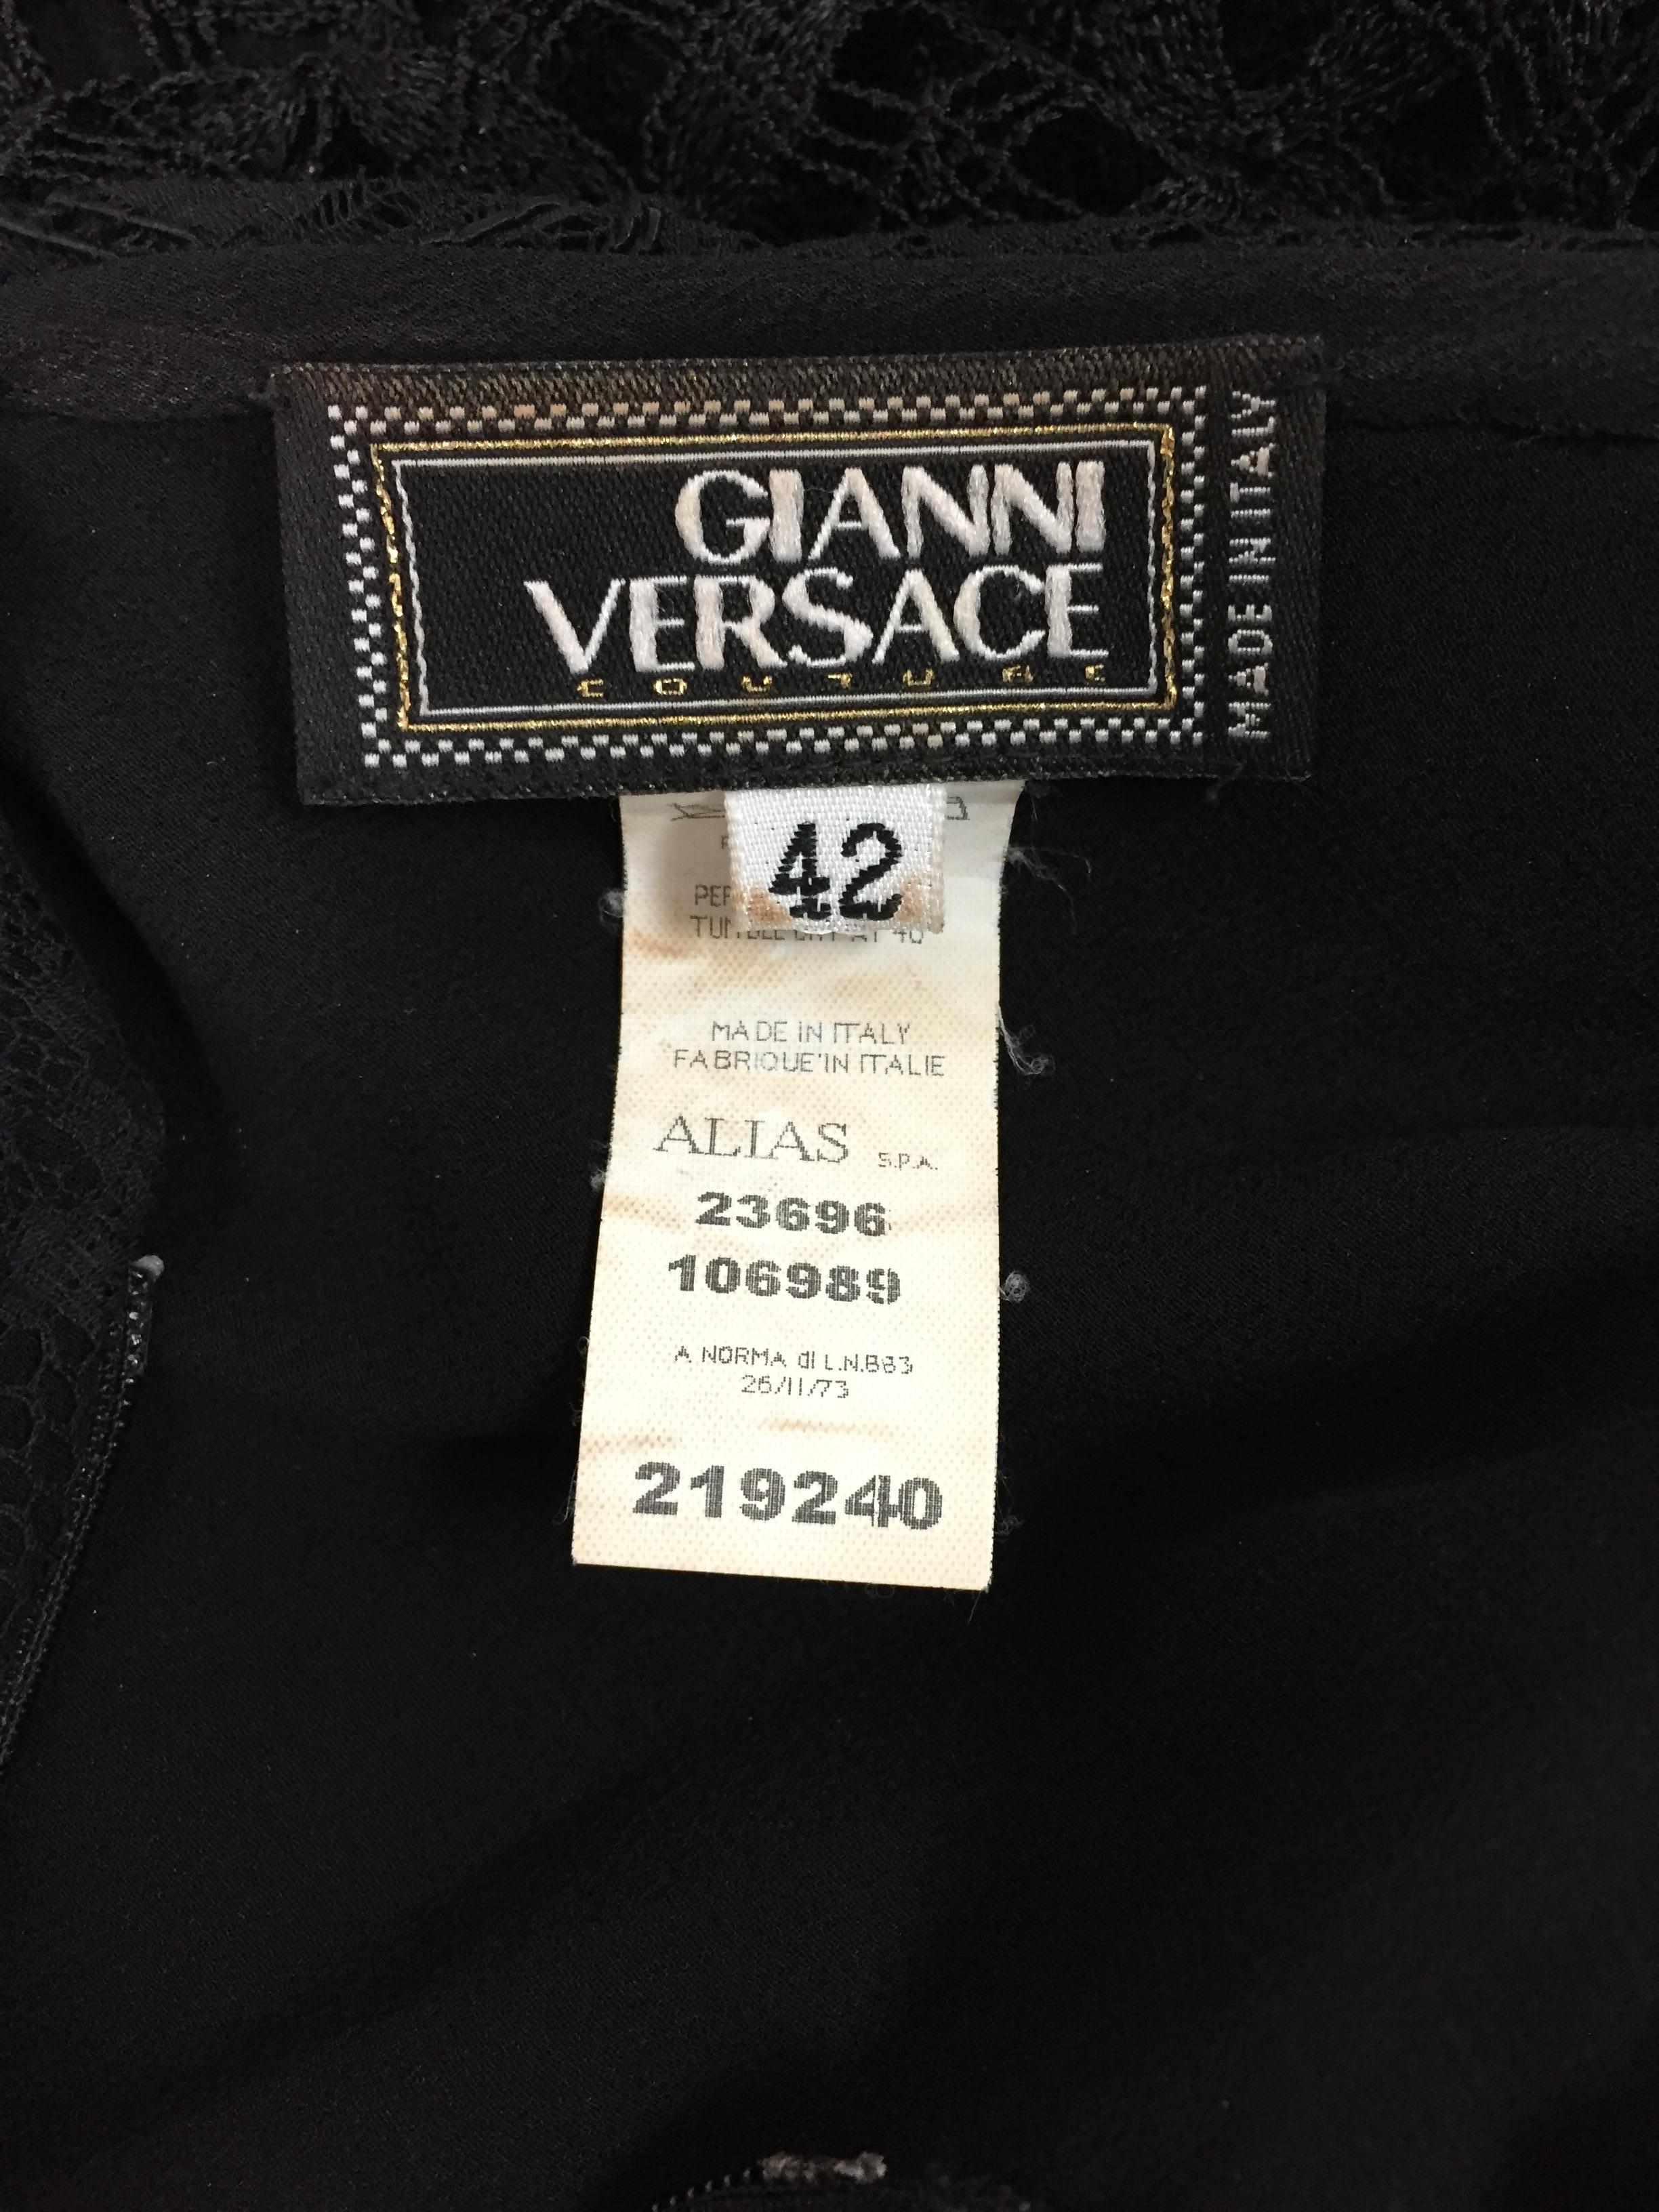 S/S 2002 Gianni Versace Sheer Black Lace Plunging Backless Halter Gown Dress In Good Condition In Yukon, OK